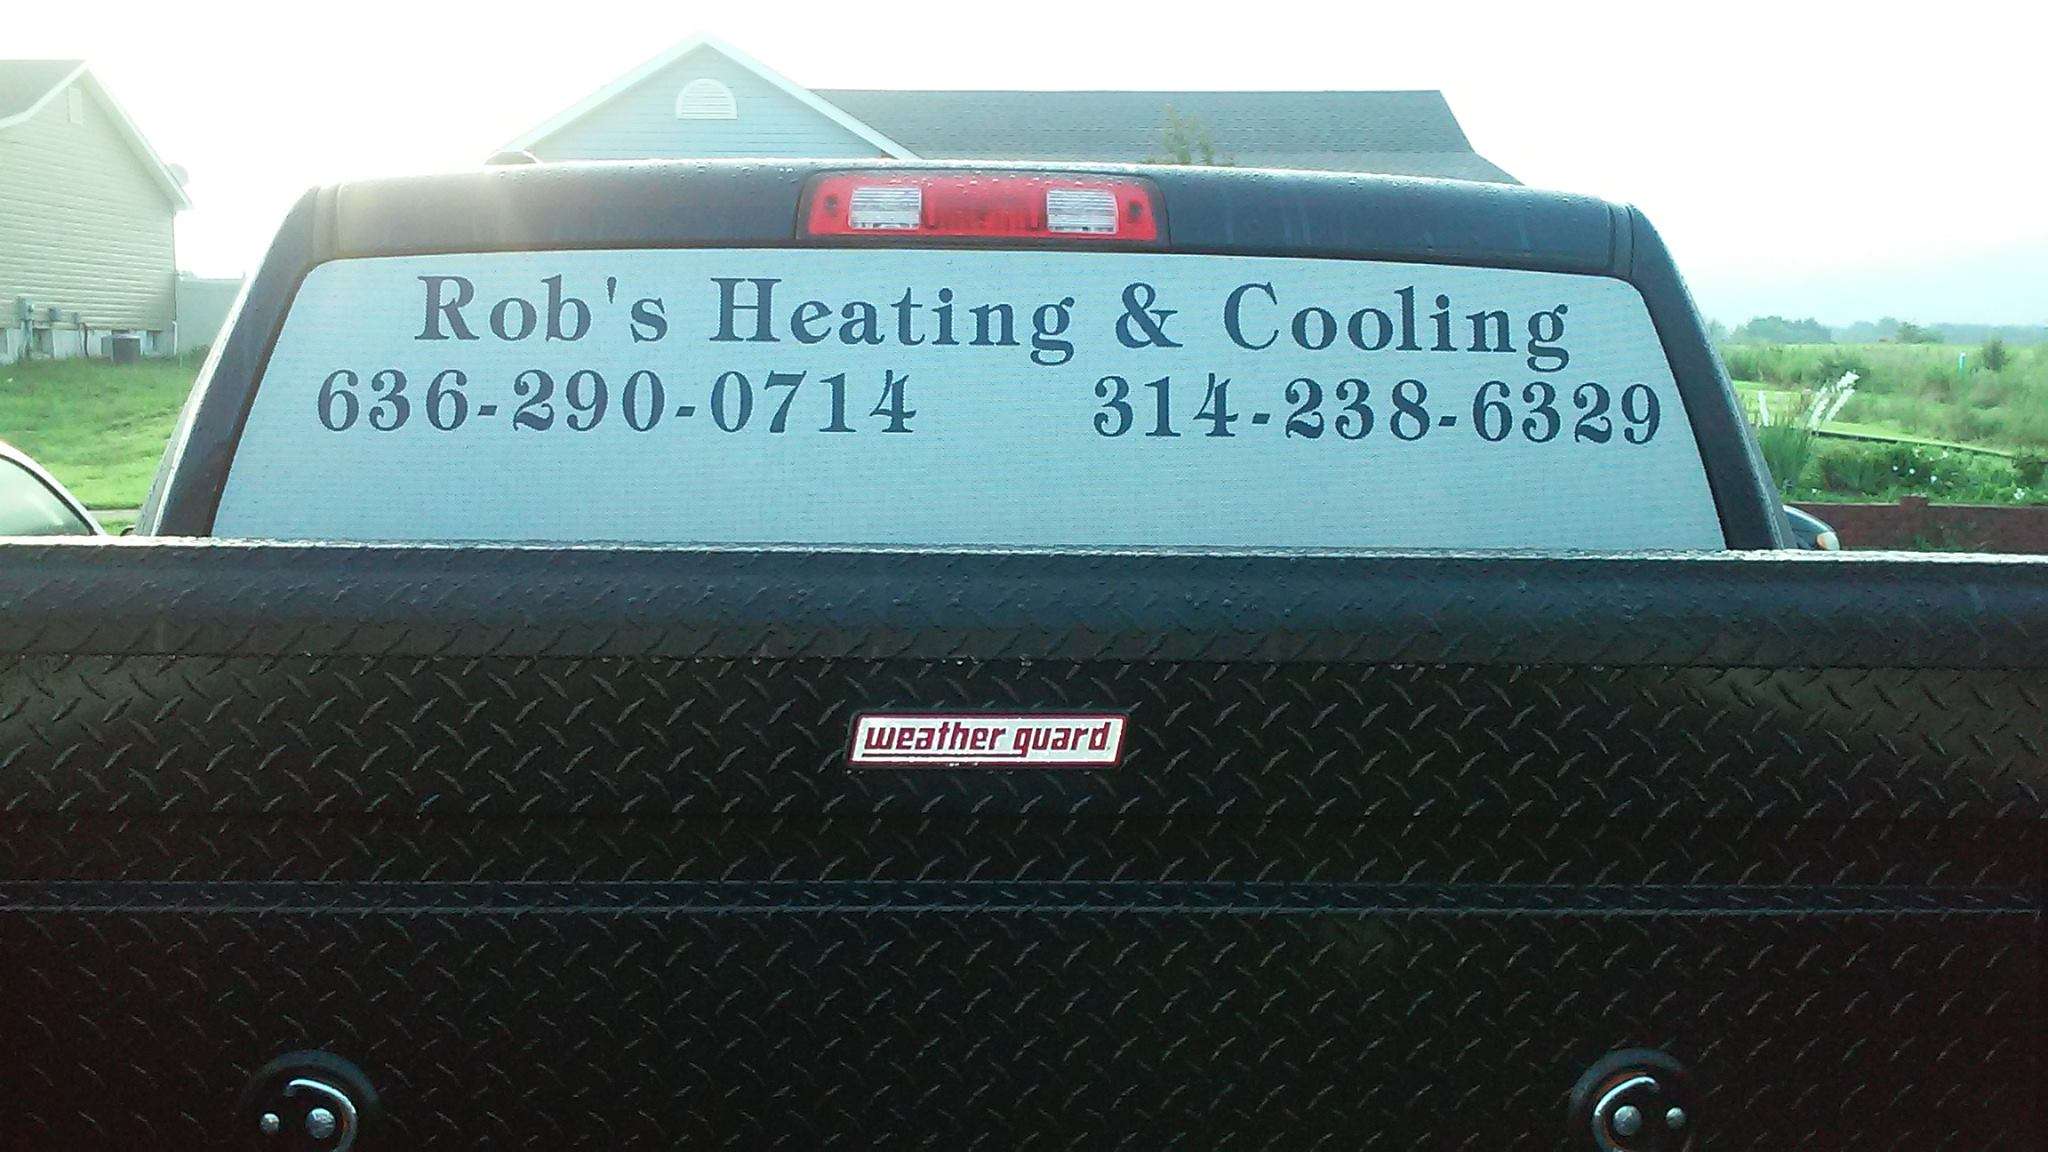 Rob's Heating & Cooling Logo